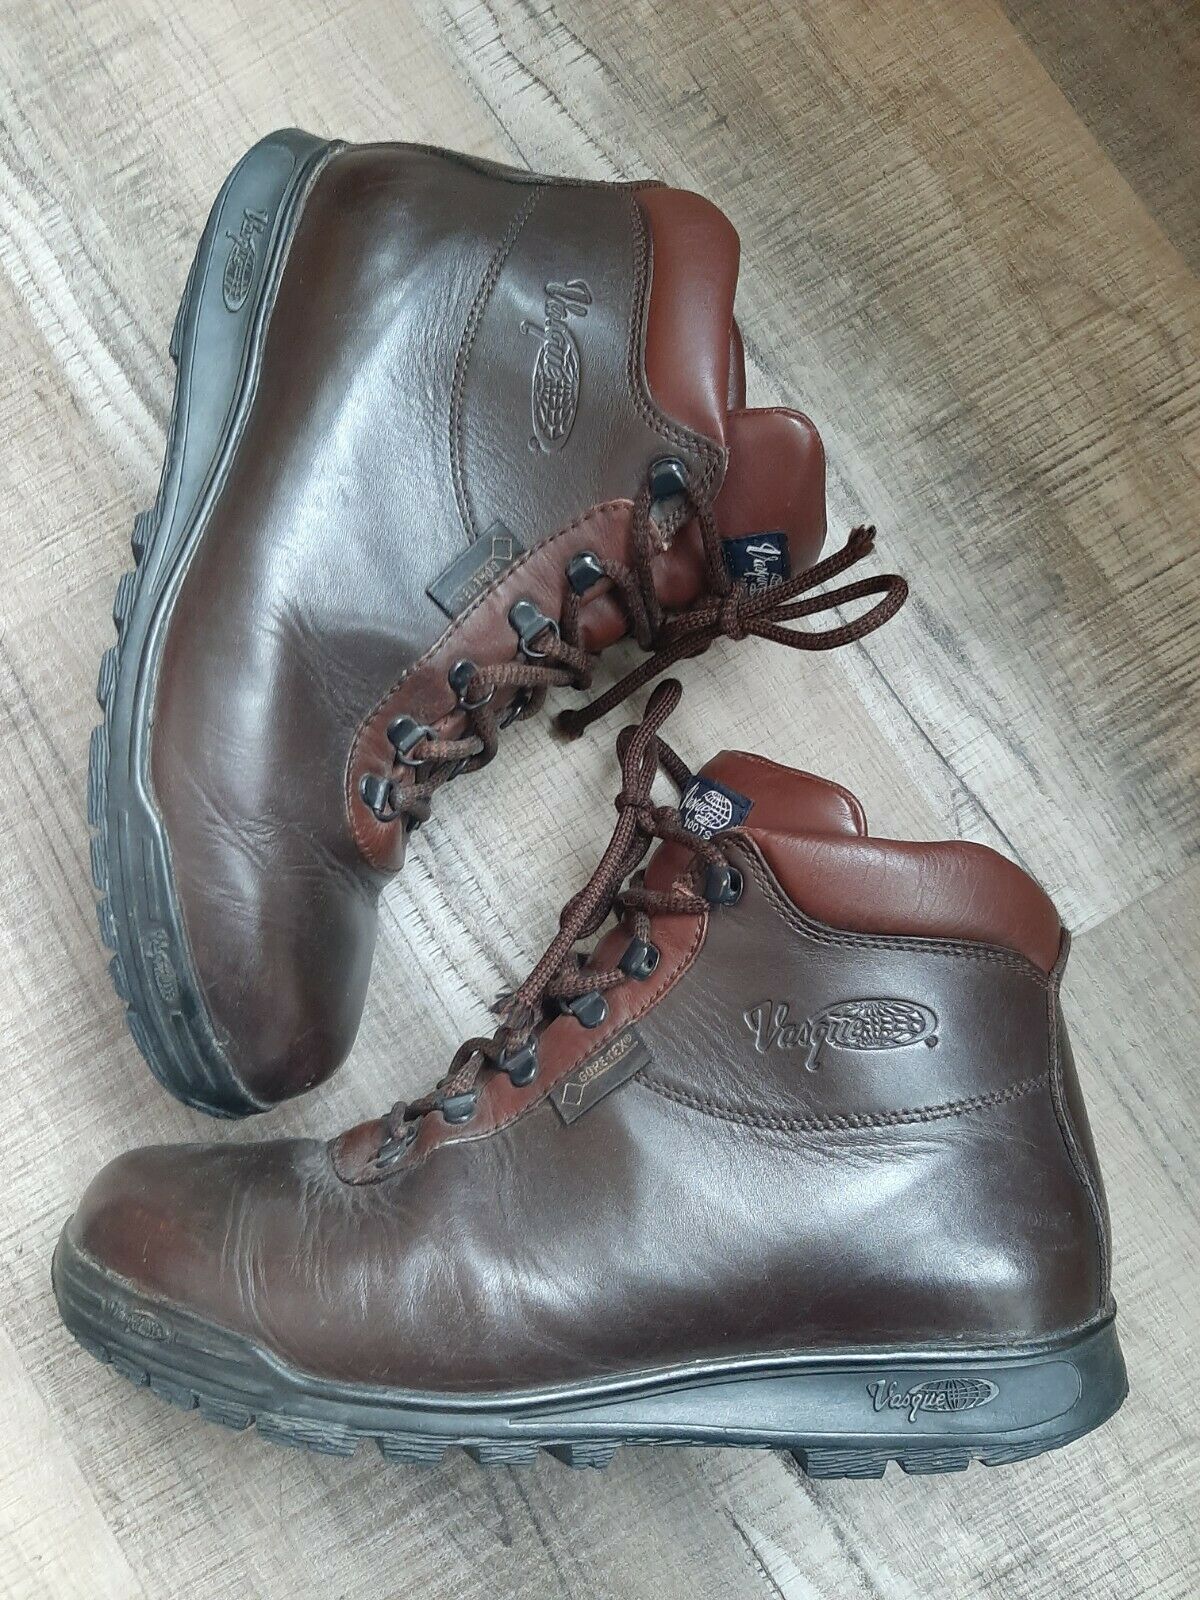 Vasque Men's Hiking Boots Sz 11 Brown Leather Lace Up